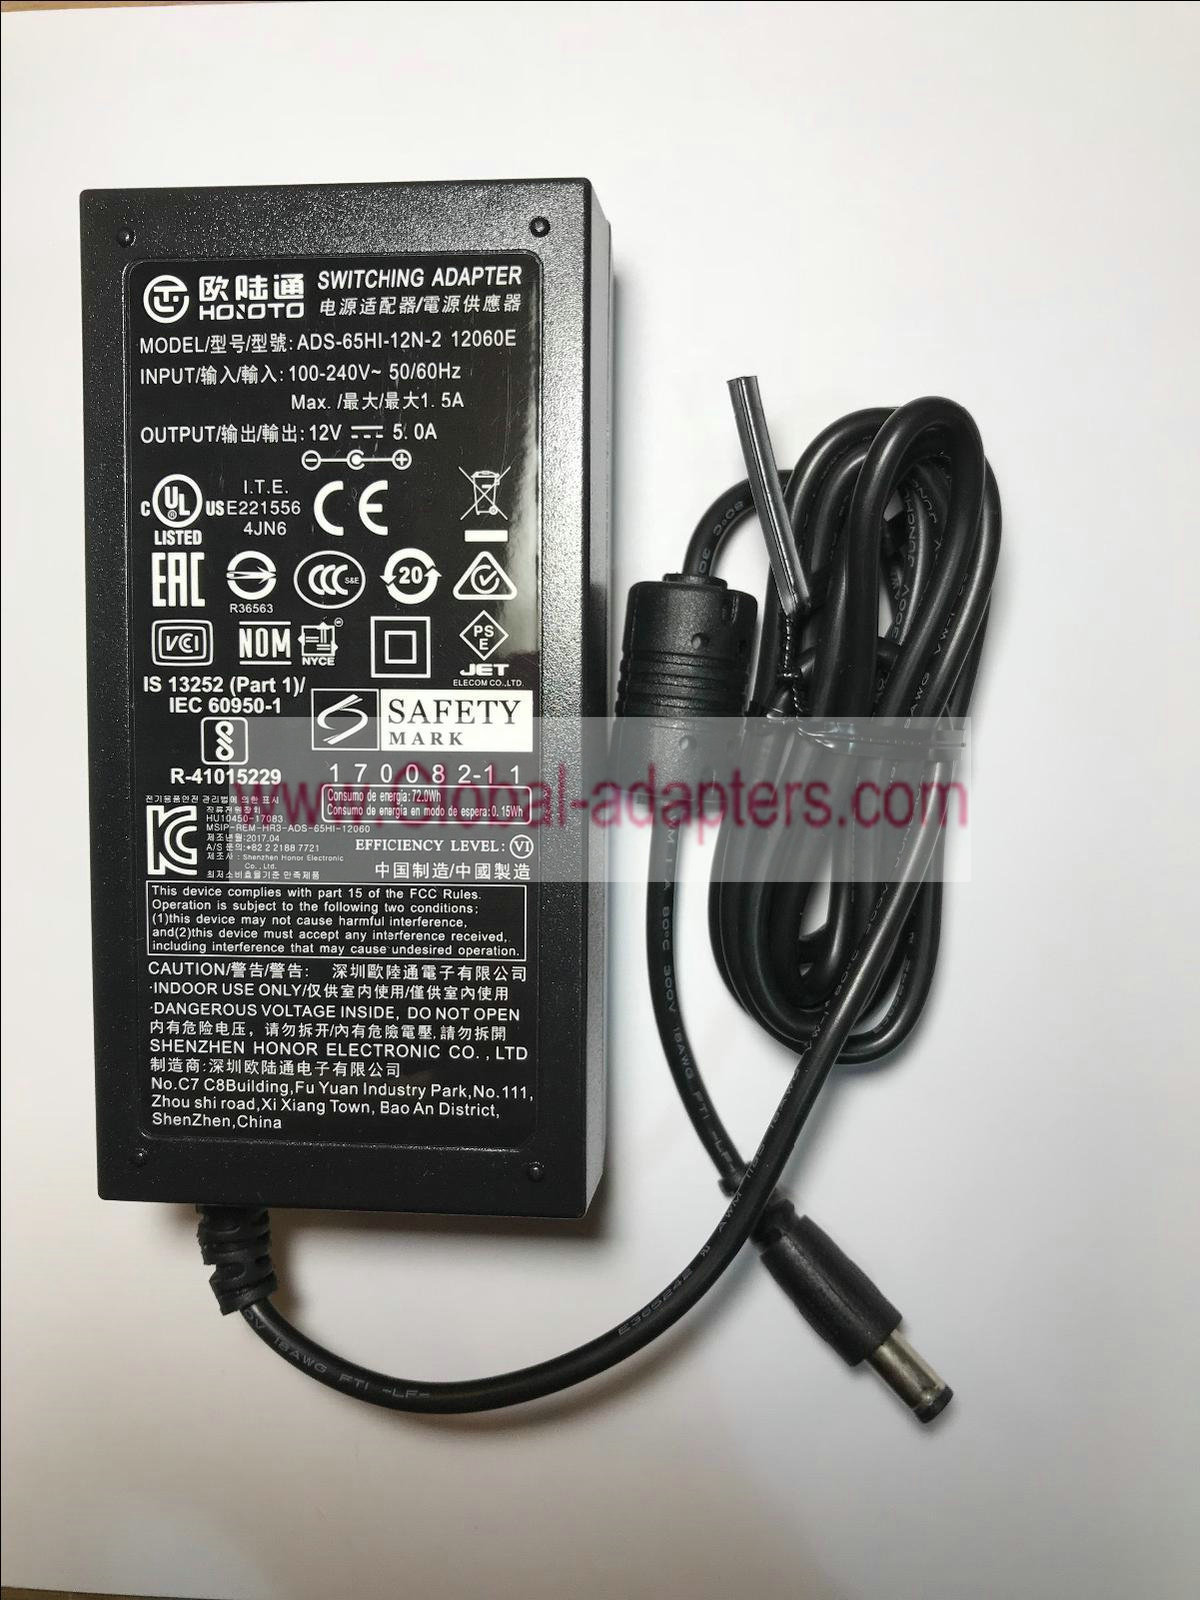 Genuine HOIOTO 12V 5.0A Switching Adapter ADS-65HI-12N-2 12060E Power Supply - Click Image to Close